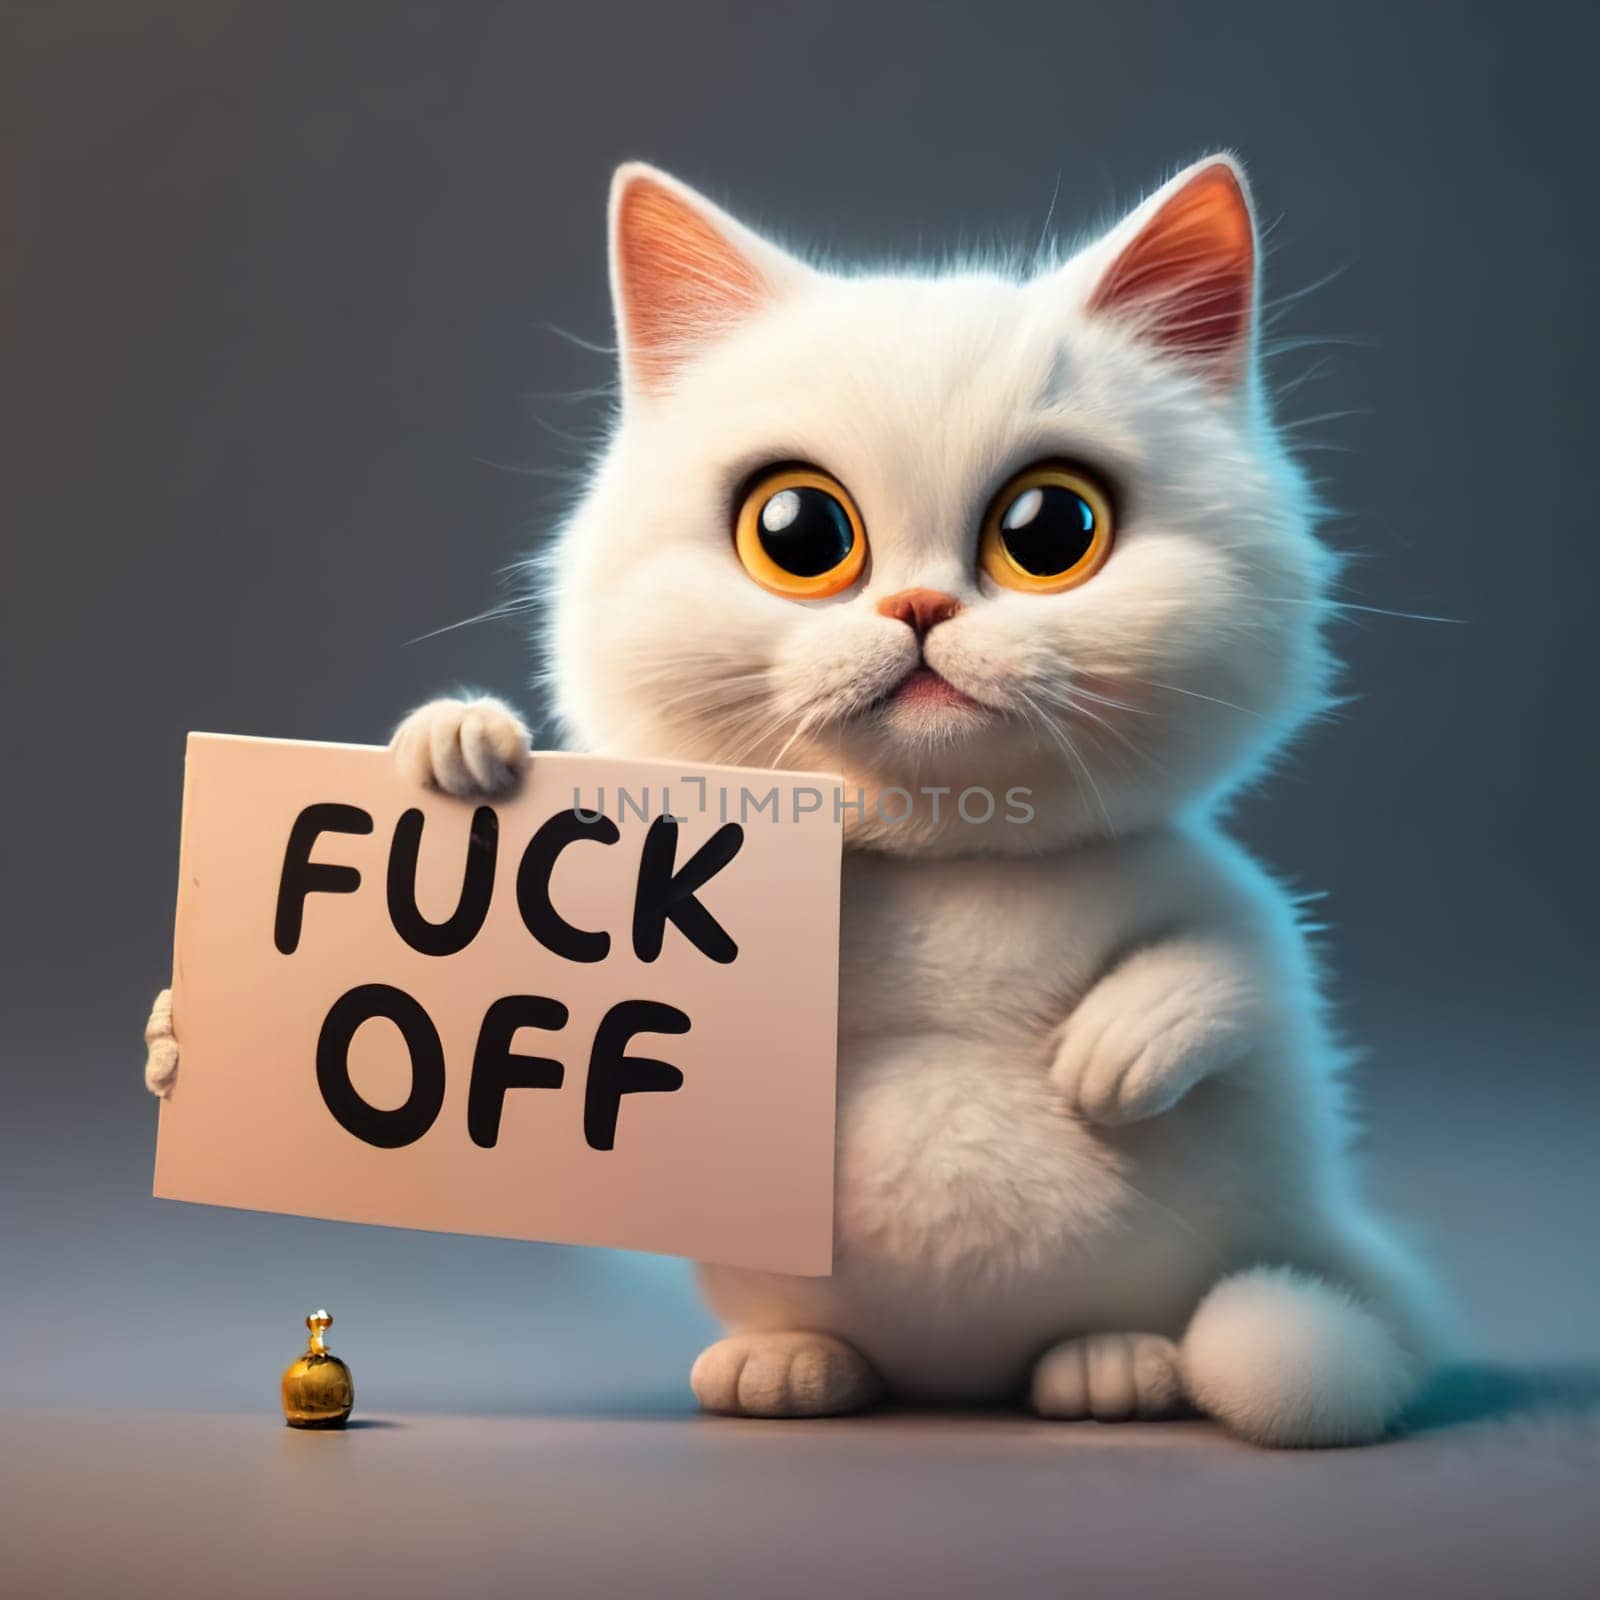 Realistic Cute White Cat in Emoji Style with Various Emotions, Holding a Sign with the Words FUCK OFF - Expressive Pet Illustration by igor010